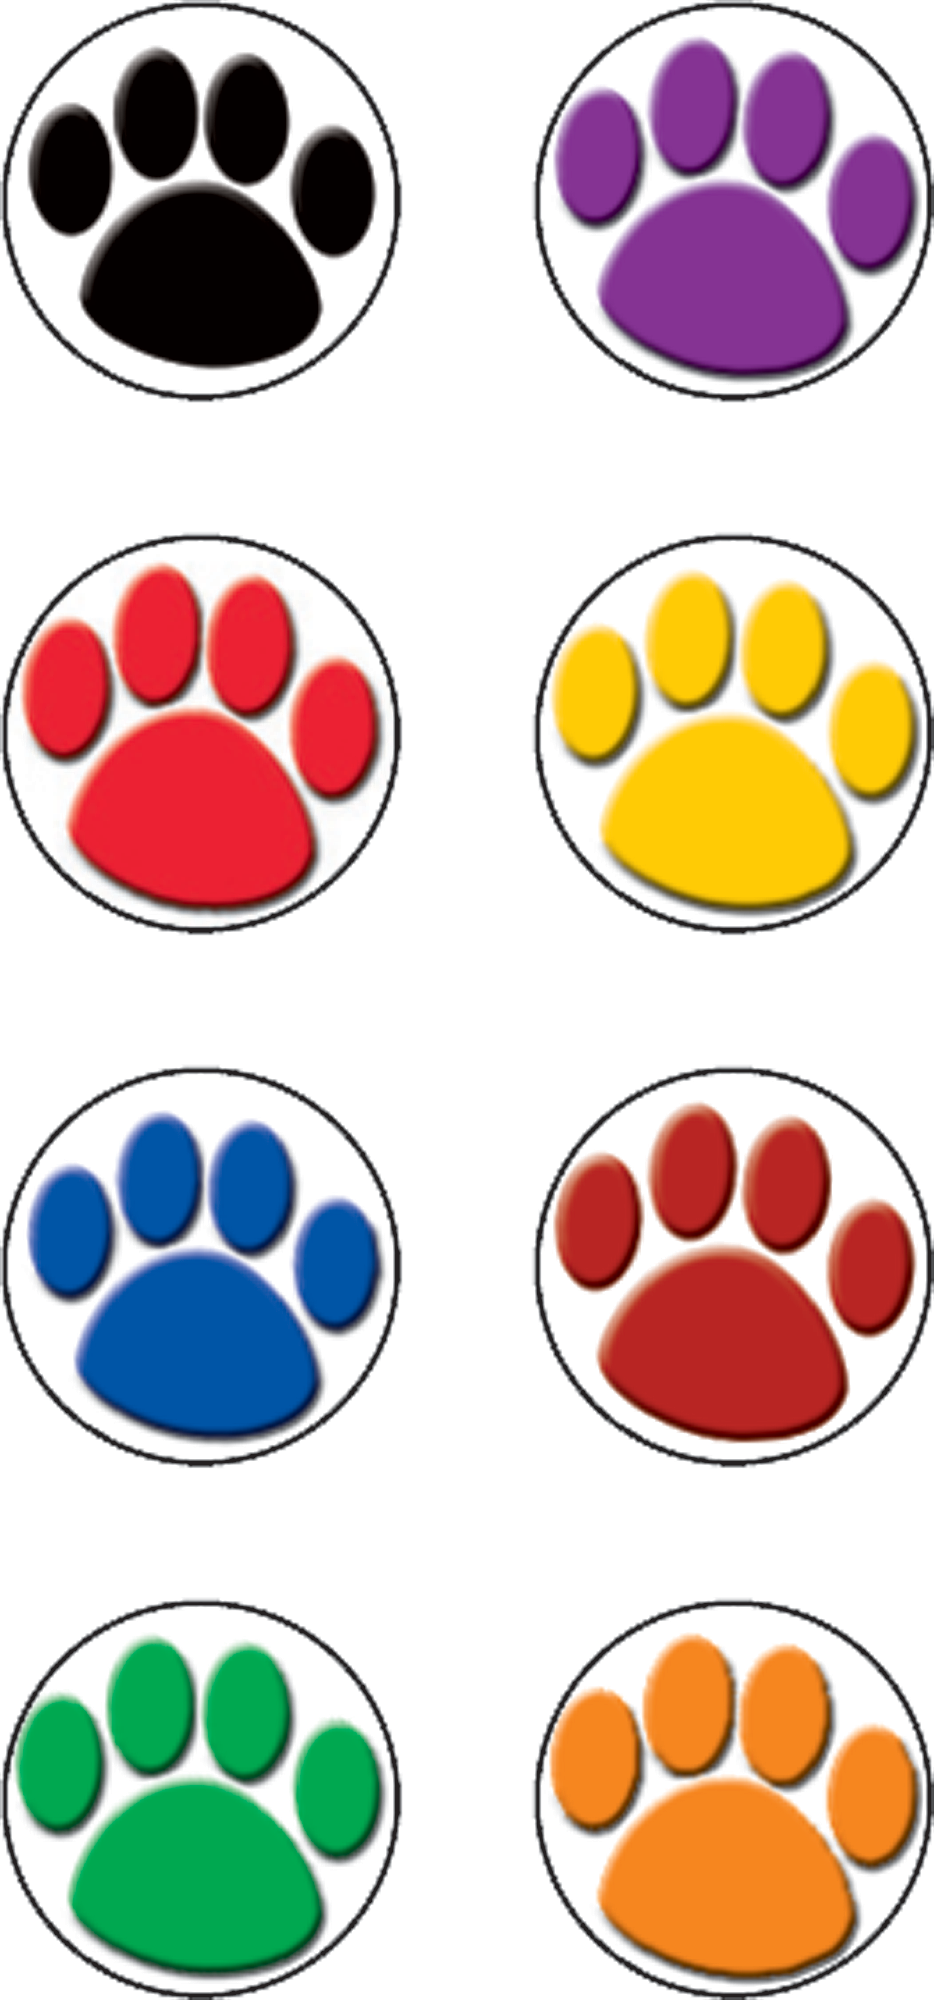 Teacher Created Resources Colorful Paw Prints Incentive Chart 7622 